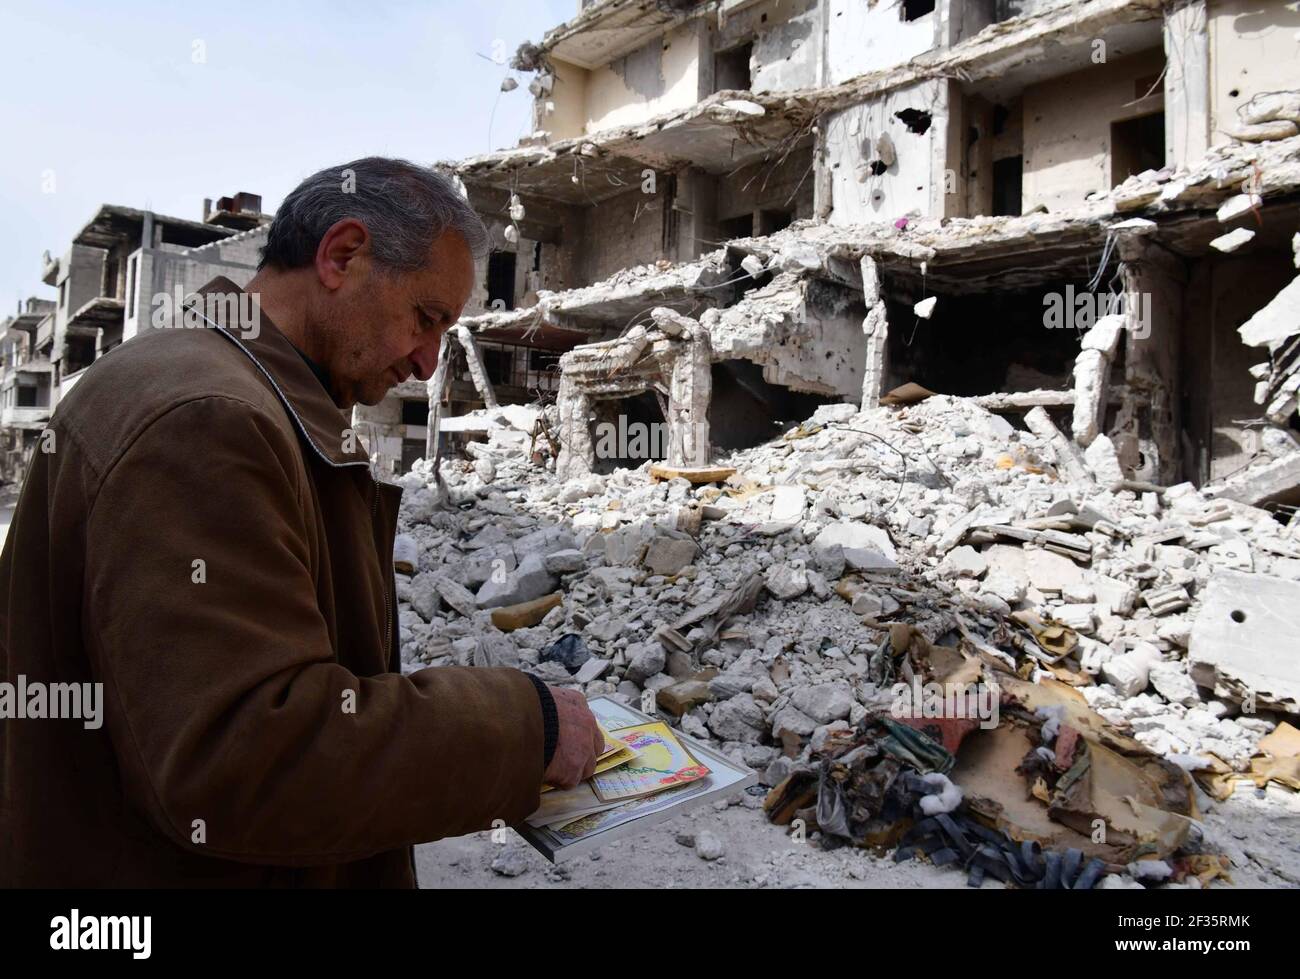 Homs, Homs city in central Syria. 11th Mar, 2021. Hadi Ghusoun, a retired English teacher in his late 60s, looks at old certificates, which he had found under the rubble of his shattered house in Homs city in central Syria, March 11, 2021. TO GO WITH: 'Feature: After 10 years of Syrian war, elderly give up hope for returning home' Credit: Ammar Safarjalani/Xinhua/Alamy Live News Stock Photo